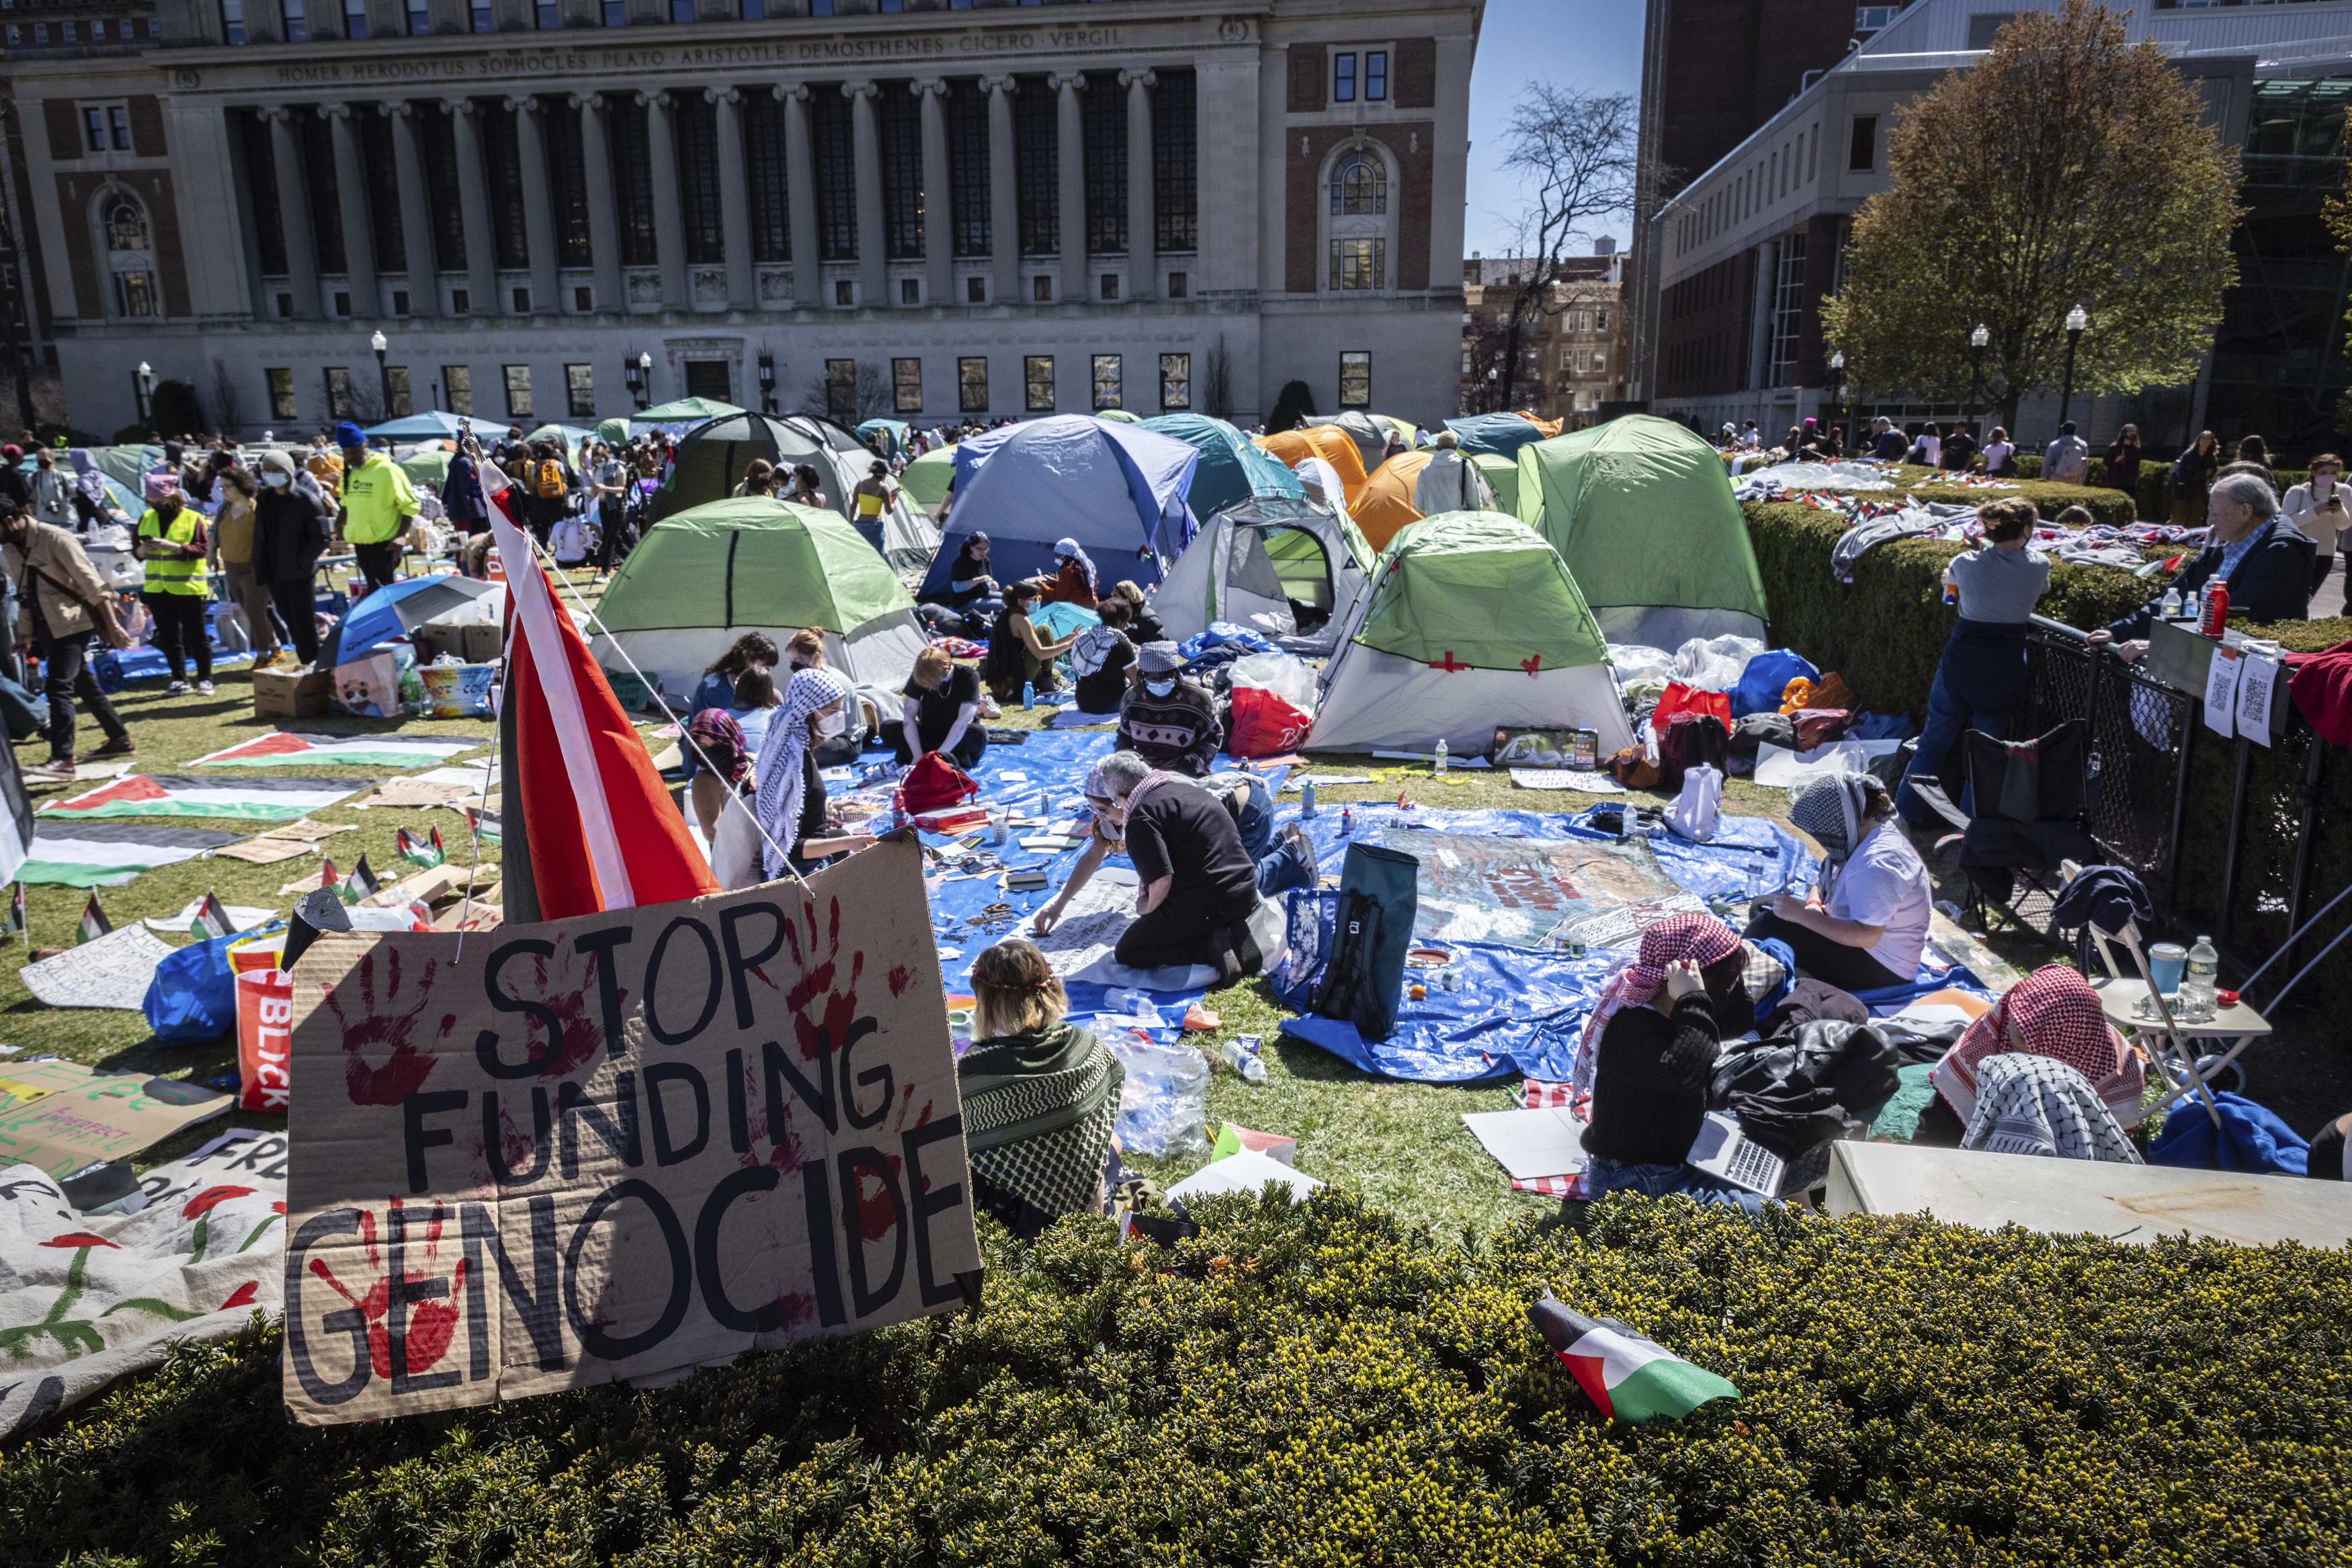 A sign reads “STOP FUNDING GENOCIDE” at a pro-Palestinian encampment at Columbia University in New York on April 22.